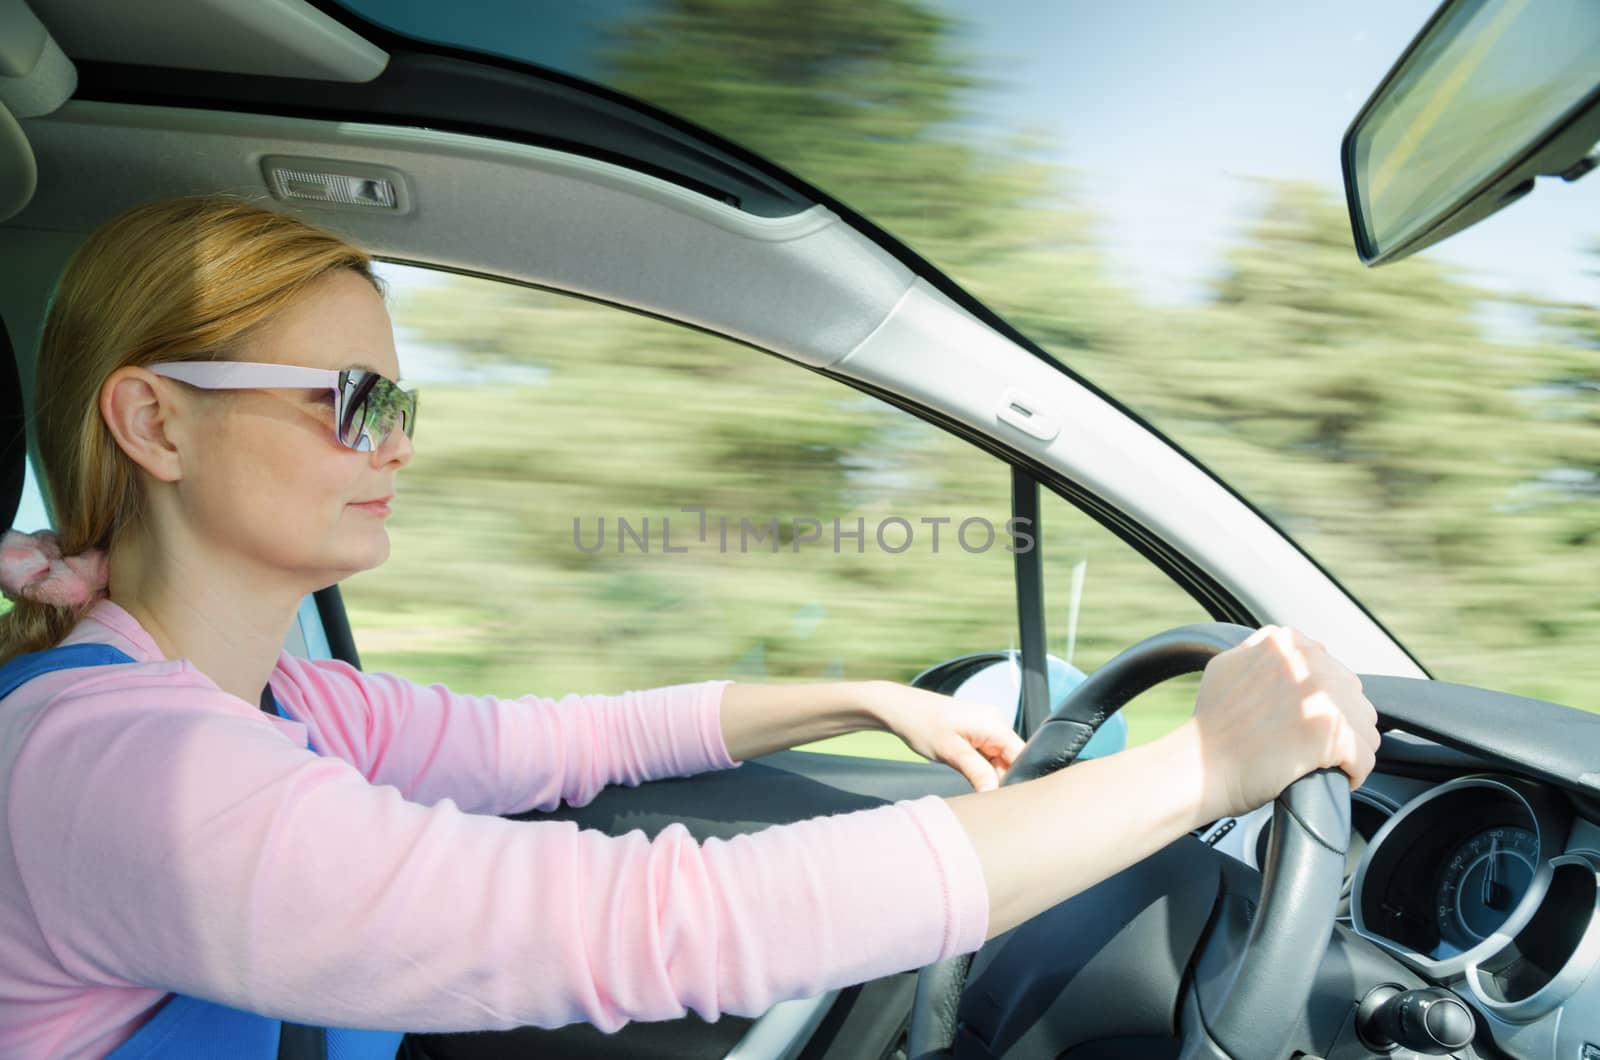 Pretty woman in sunglasses driving fast car with panoramic windscreen. Stock photo with slow shutter on high speed and blurred in motion nature background.